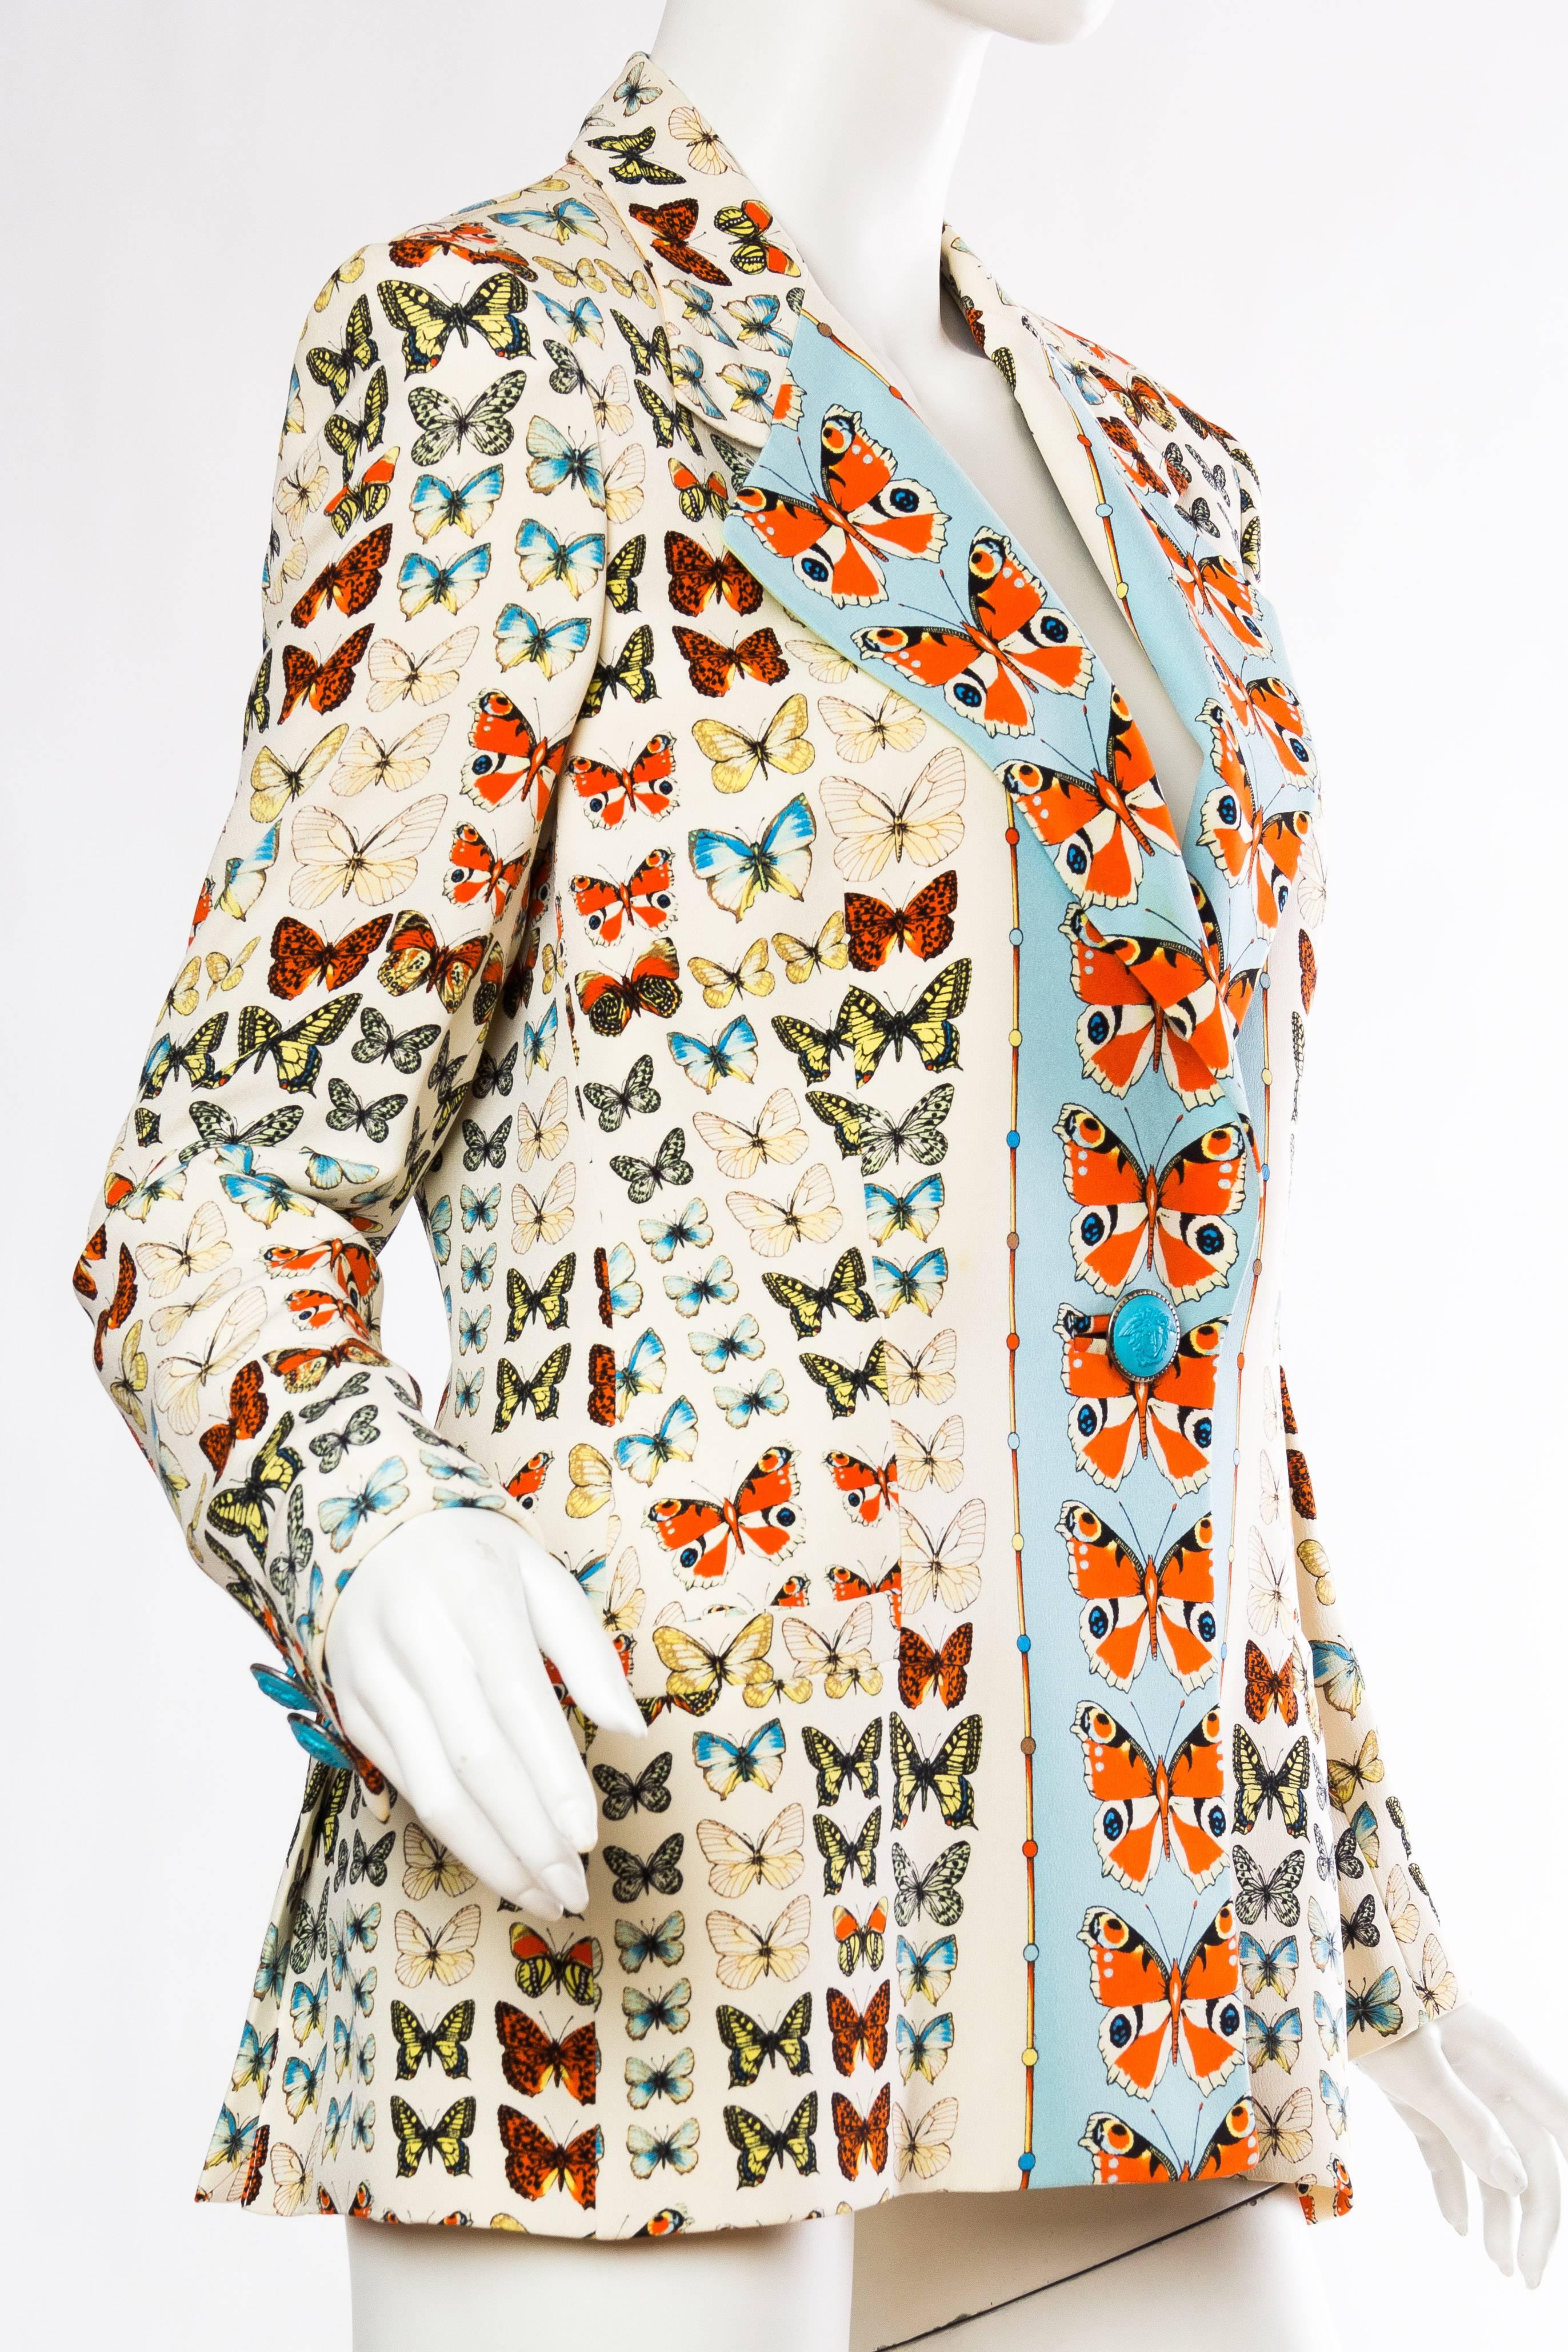 Gorgeous jacket in the iconic Versace butterfly print famously seen on the cover of Vogue. 